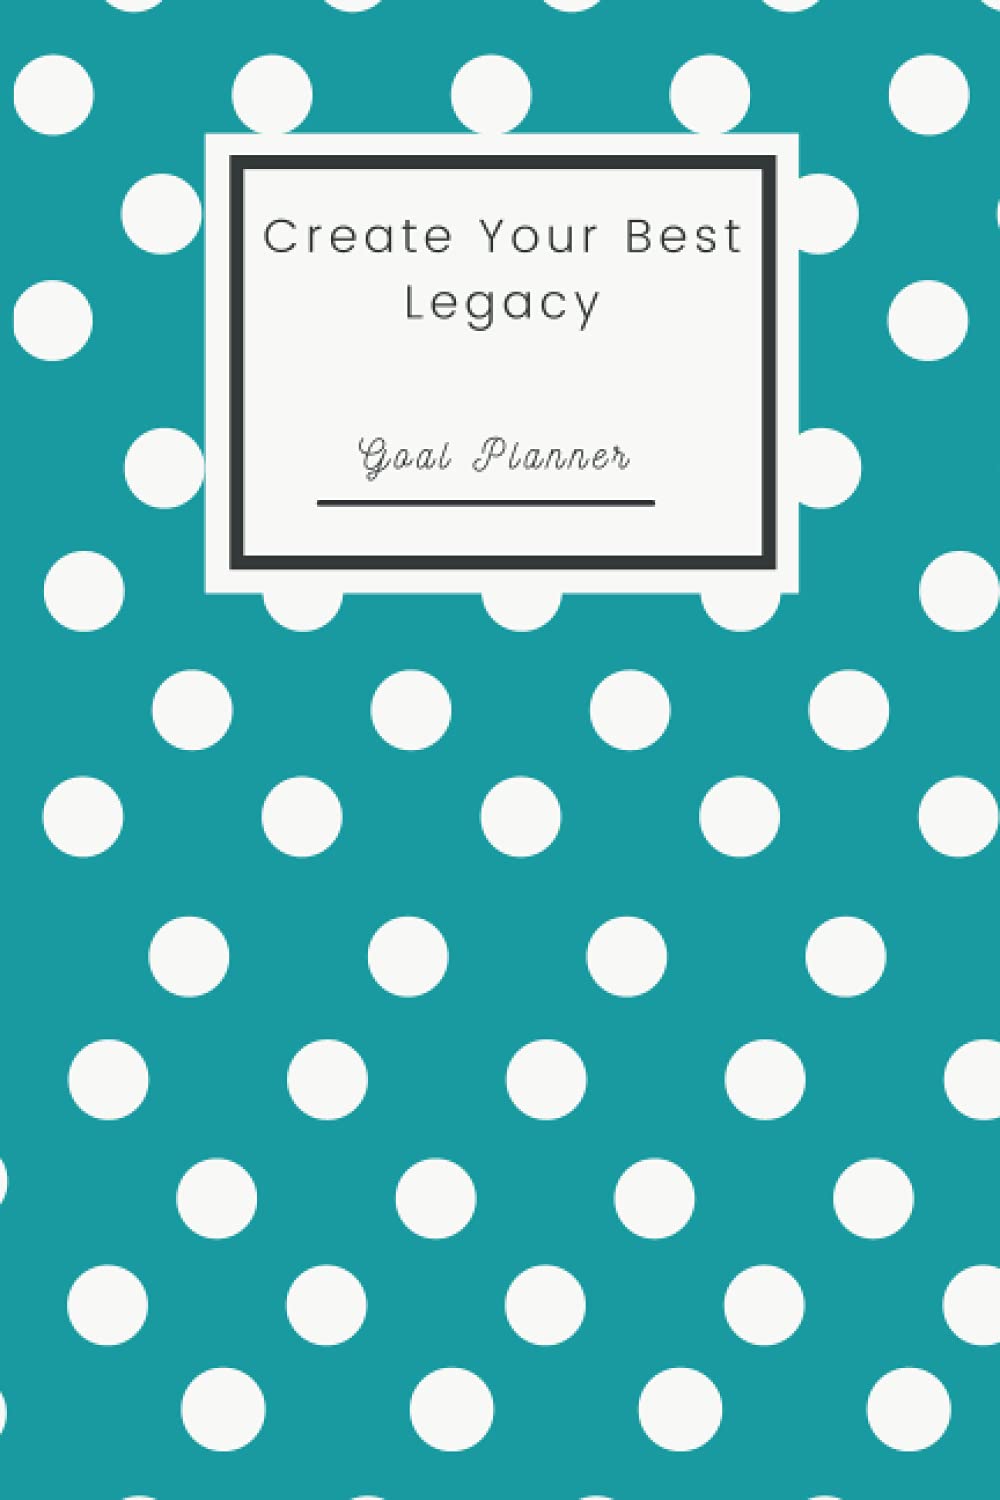 Create Your Best Legacy. 90 Day Goal Planner for setting Personal Goals, Business & Carrier Goals, Money Goals, Health & Fitness Goals: A Goal Setting ... Teens, Athletes, Business People & More.